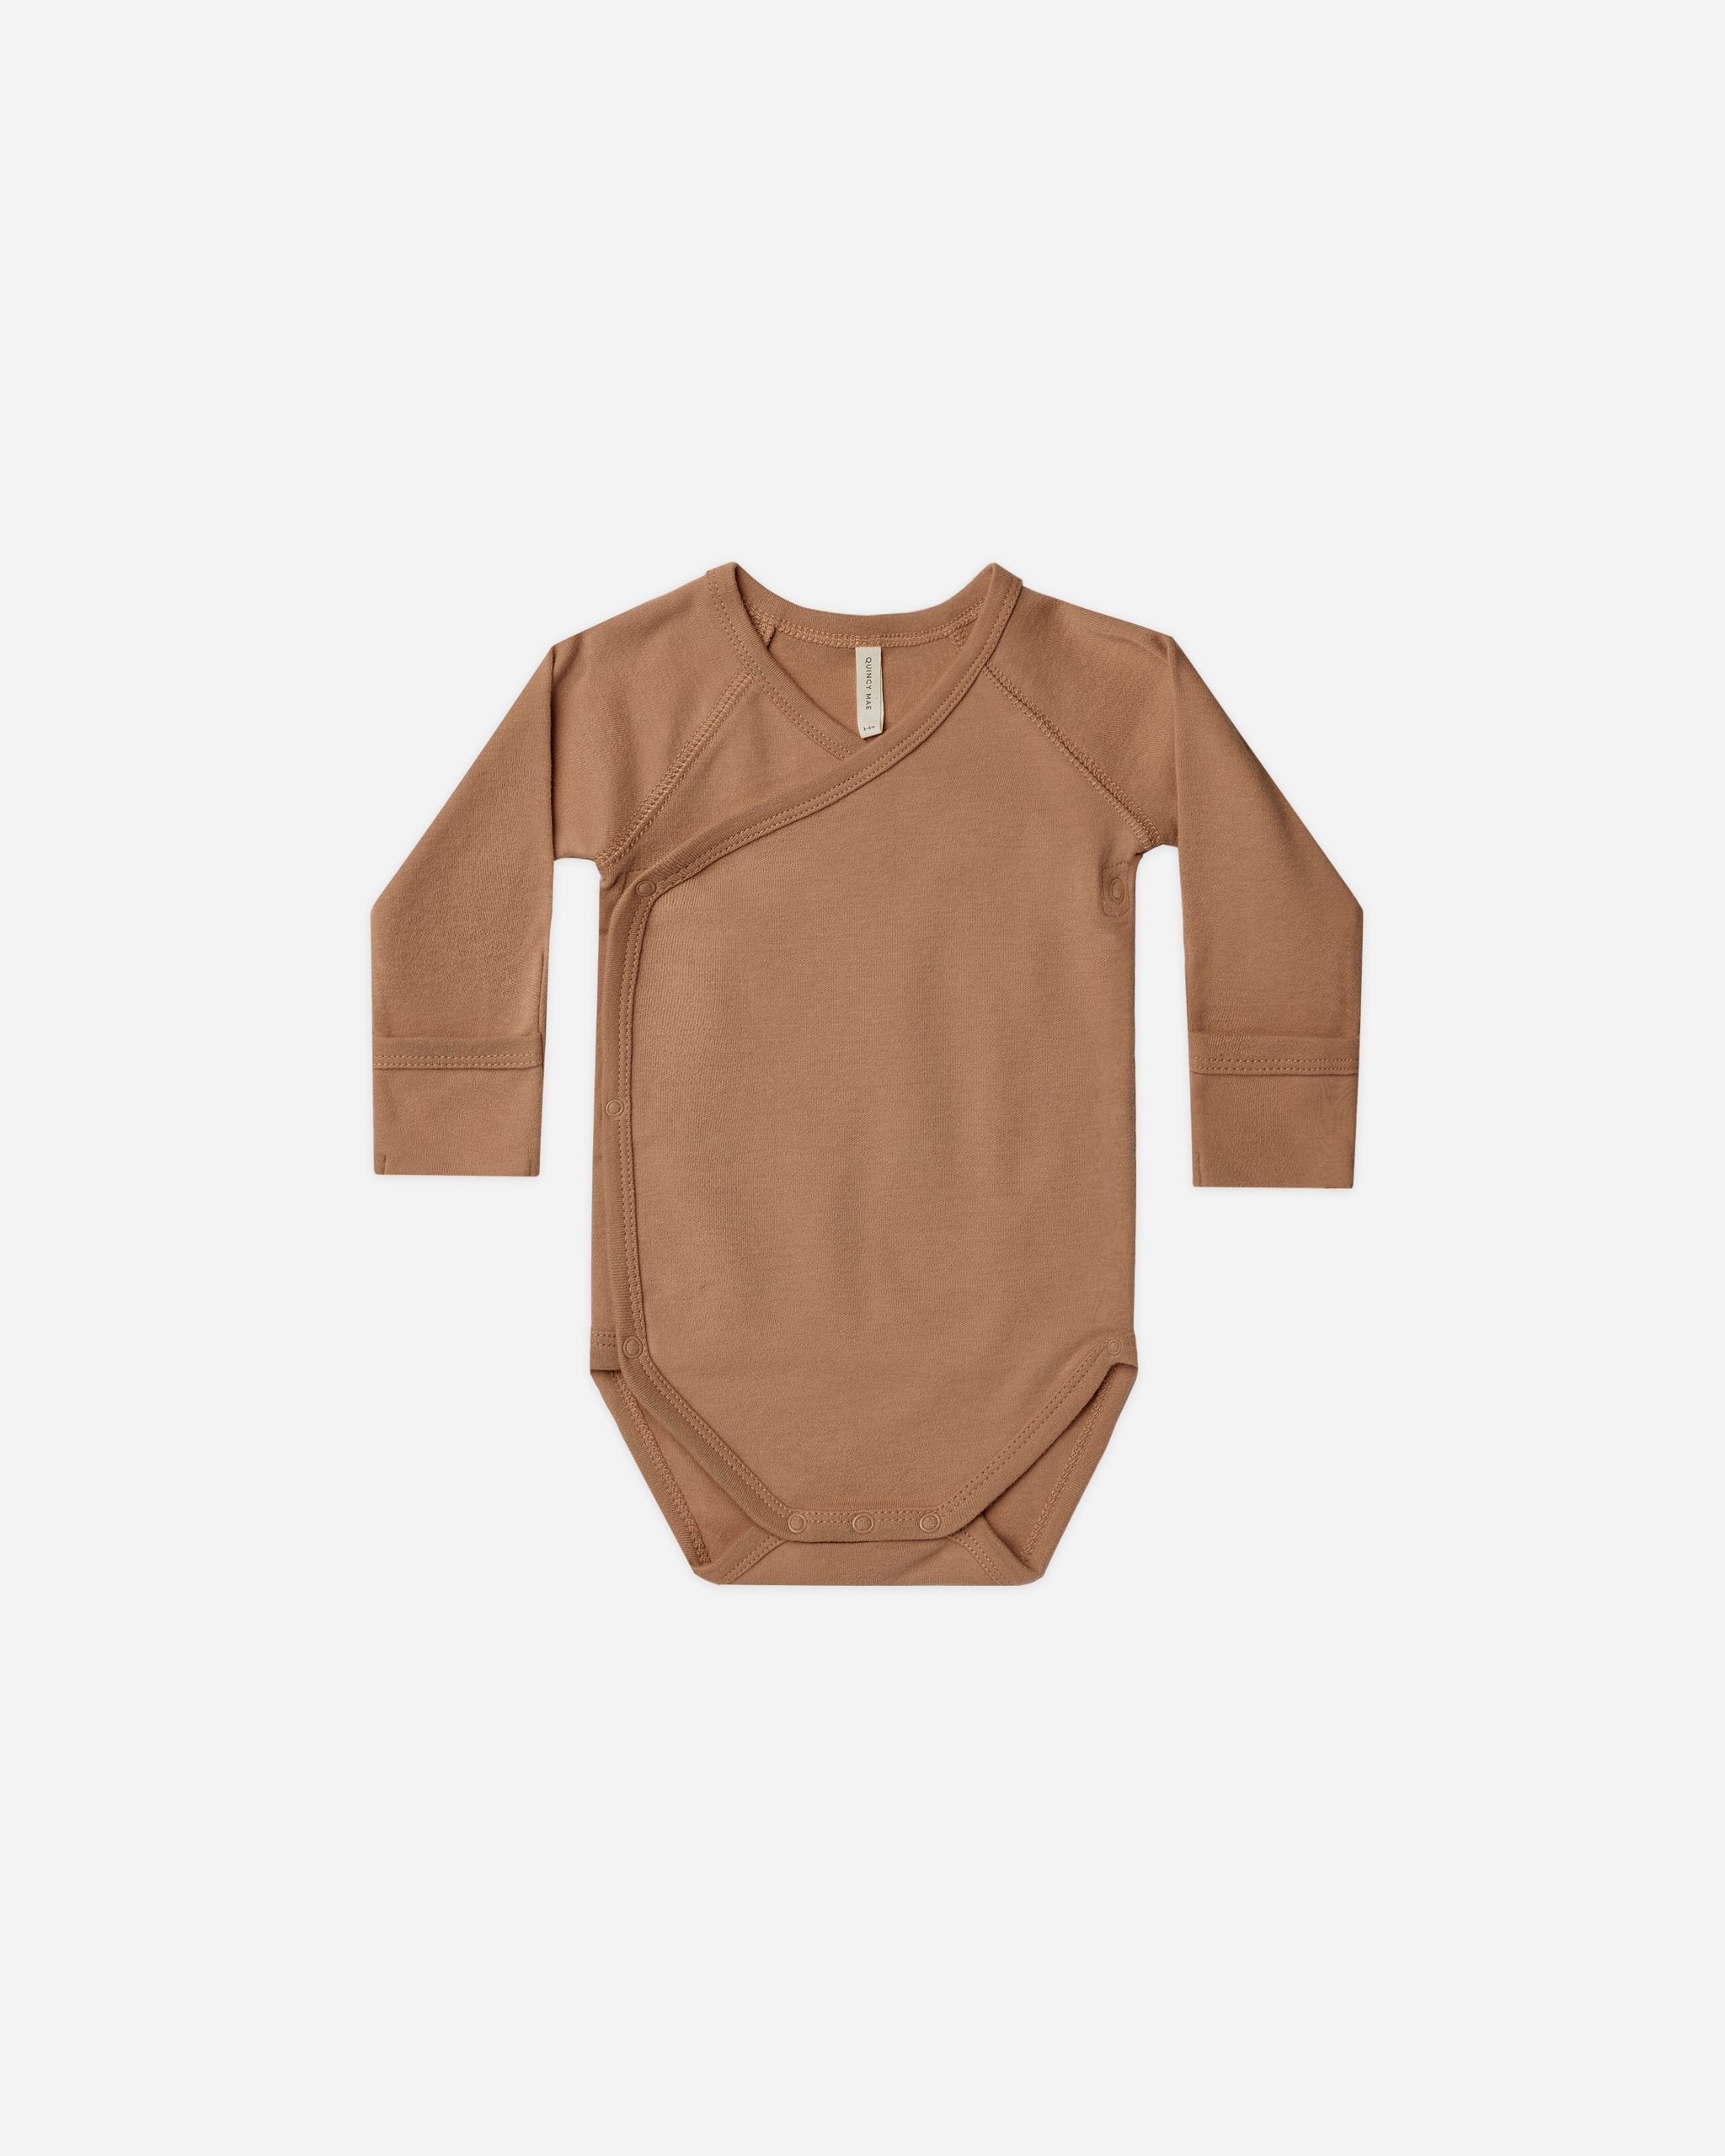 Side-Snap Bodysuit || Cinnamon - Rylee + Cru | Kids Clothes | Trendy Baby Clothes | Modern Infant Outfits |